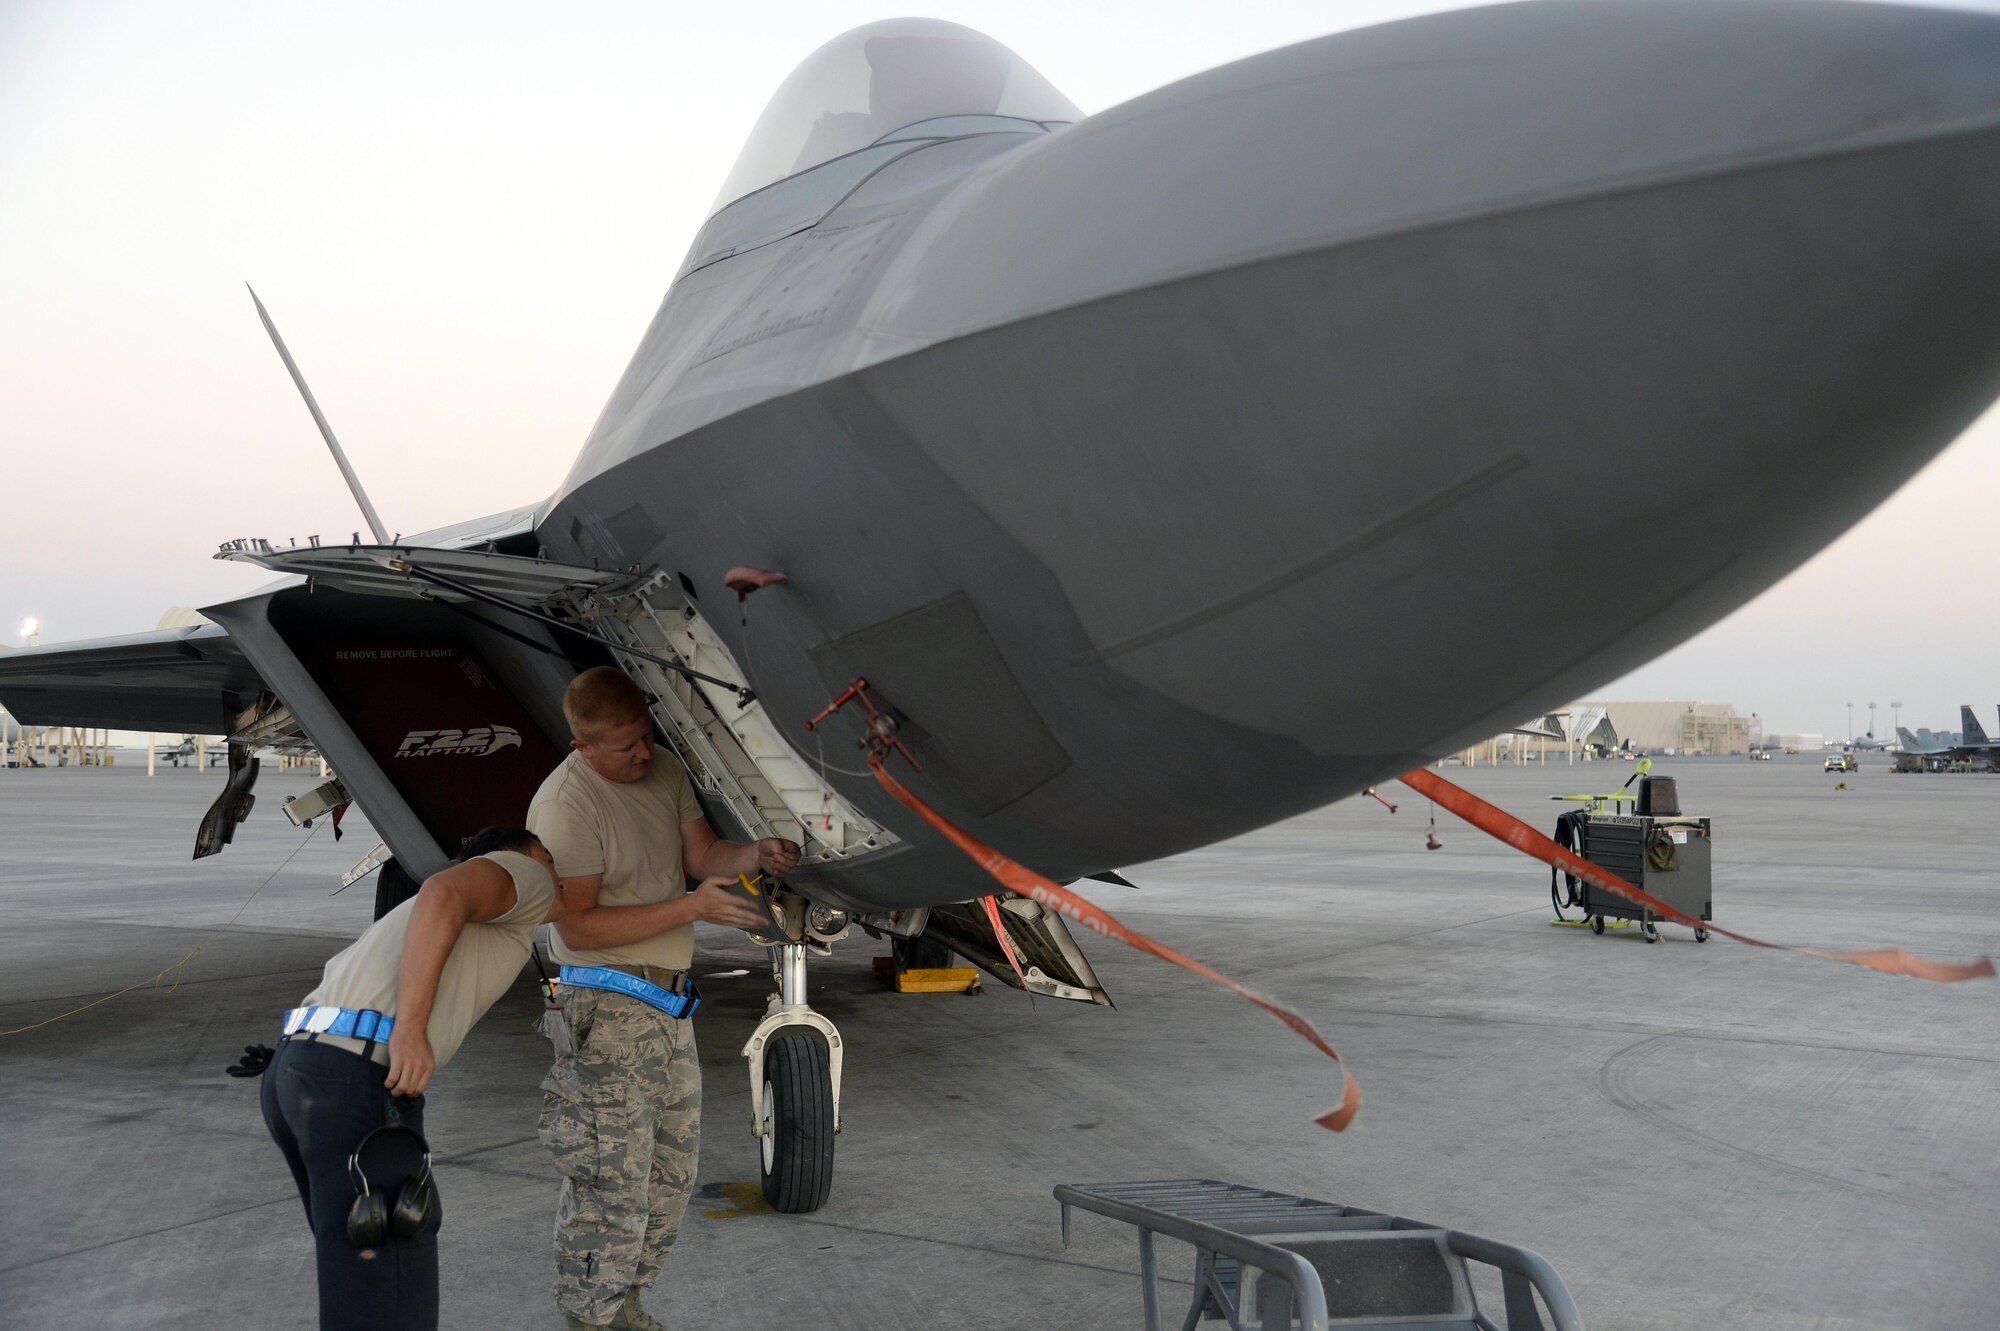 Staff Sgt. James, avionics craftsman, right, and Senior Airman Dakota, launch assist, troubleshoots a communications, navigation and identification system on an F-22 Raptor at an undisclosed location in Southwest Asia Jan. 26, 2015. The F-22 Raptor is the first aircraft to use integrated avionics, where the radar, weapons management system and electronic warfare system work as one, giving the pilot unprecedented situational awareness. James is currently deployed from Tyndall Air Force Base, Fla., and is a native of Frackville, Pa. Dakota is currently deployed from Tyndall AFB, Fla., and is a native of El Paso, Texas. (U.S. Air Force/Tech. Sgt. Marie Brown)
